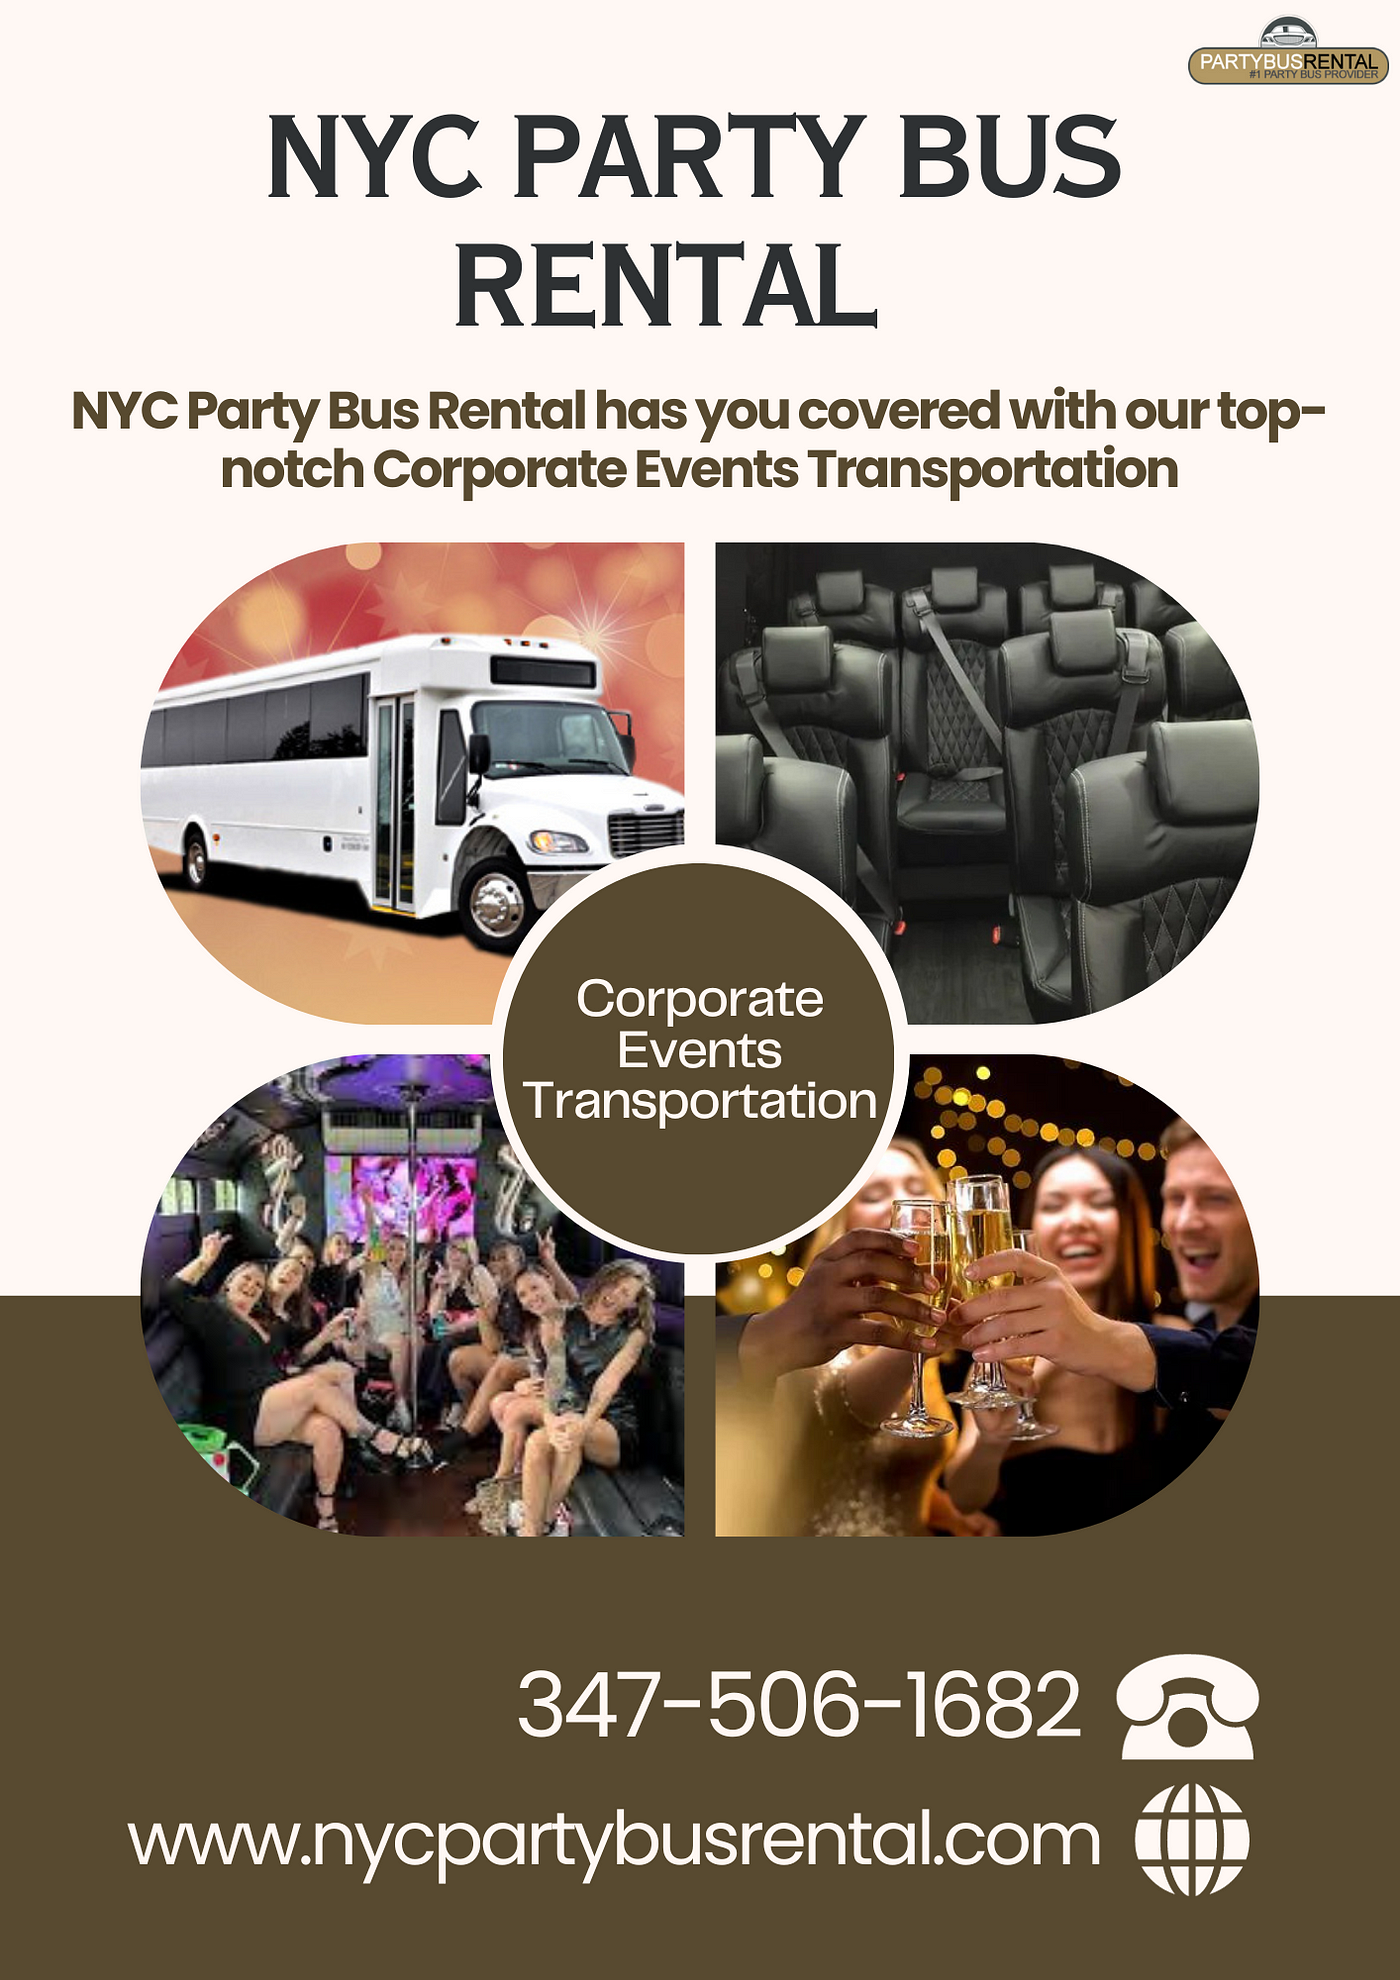 Seamless Corporate Event Transportation in the Heart of NYC with